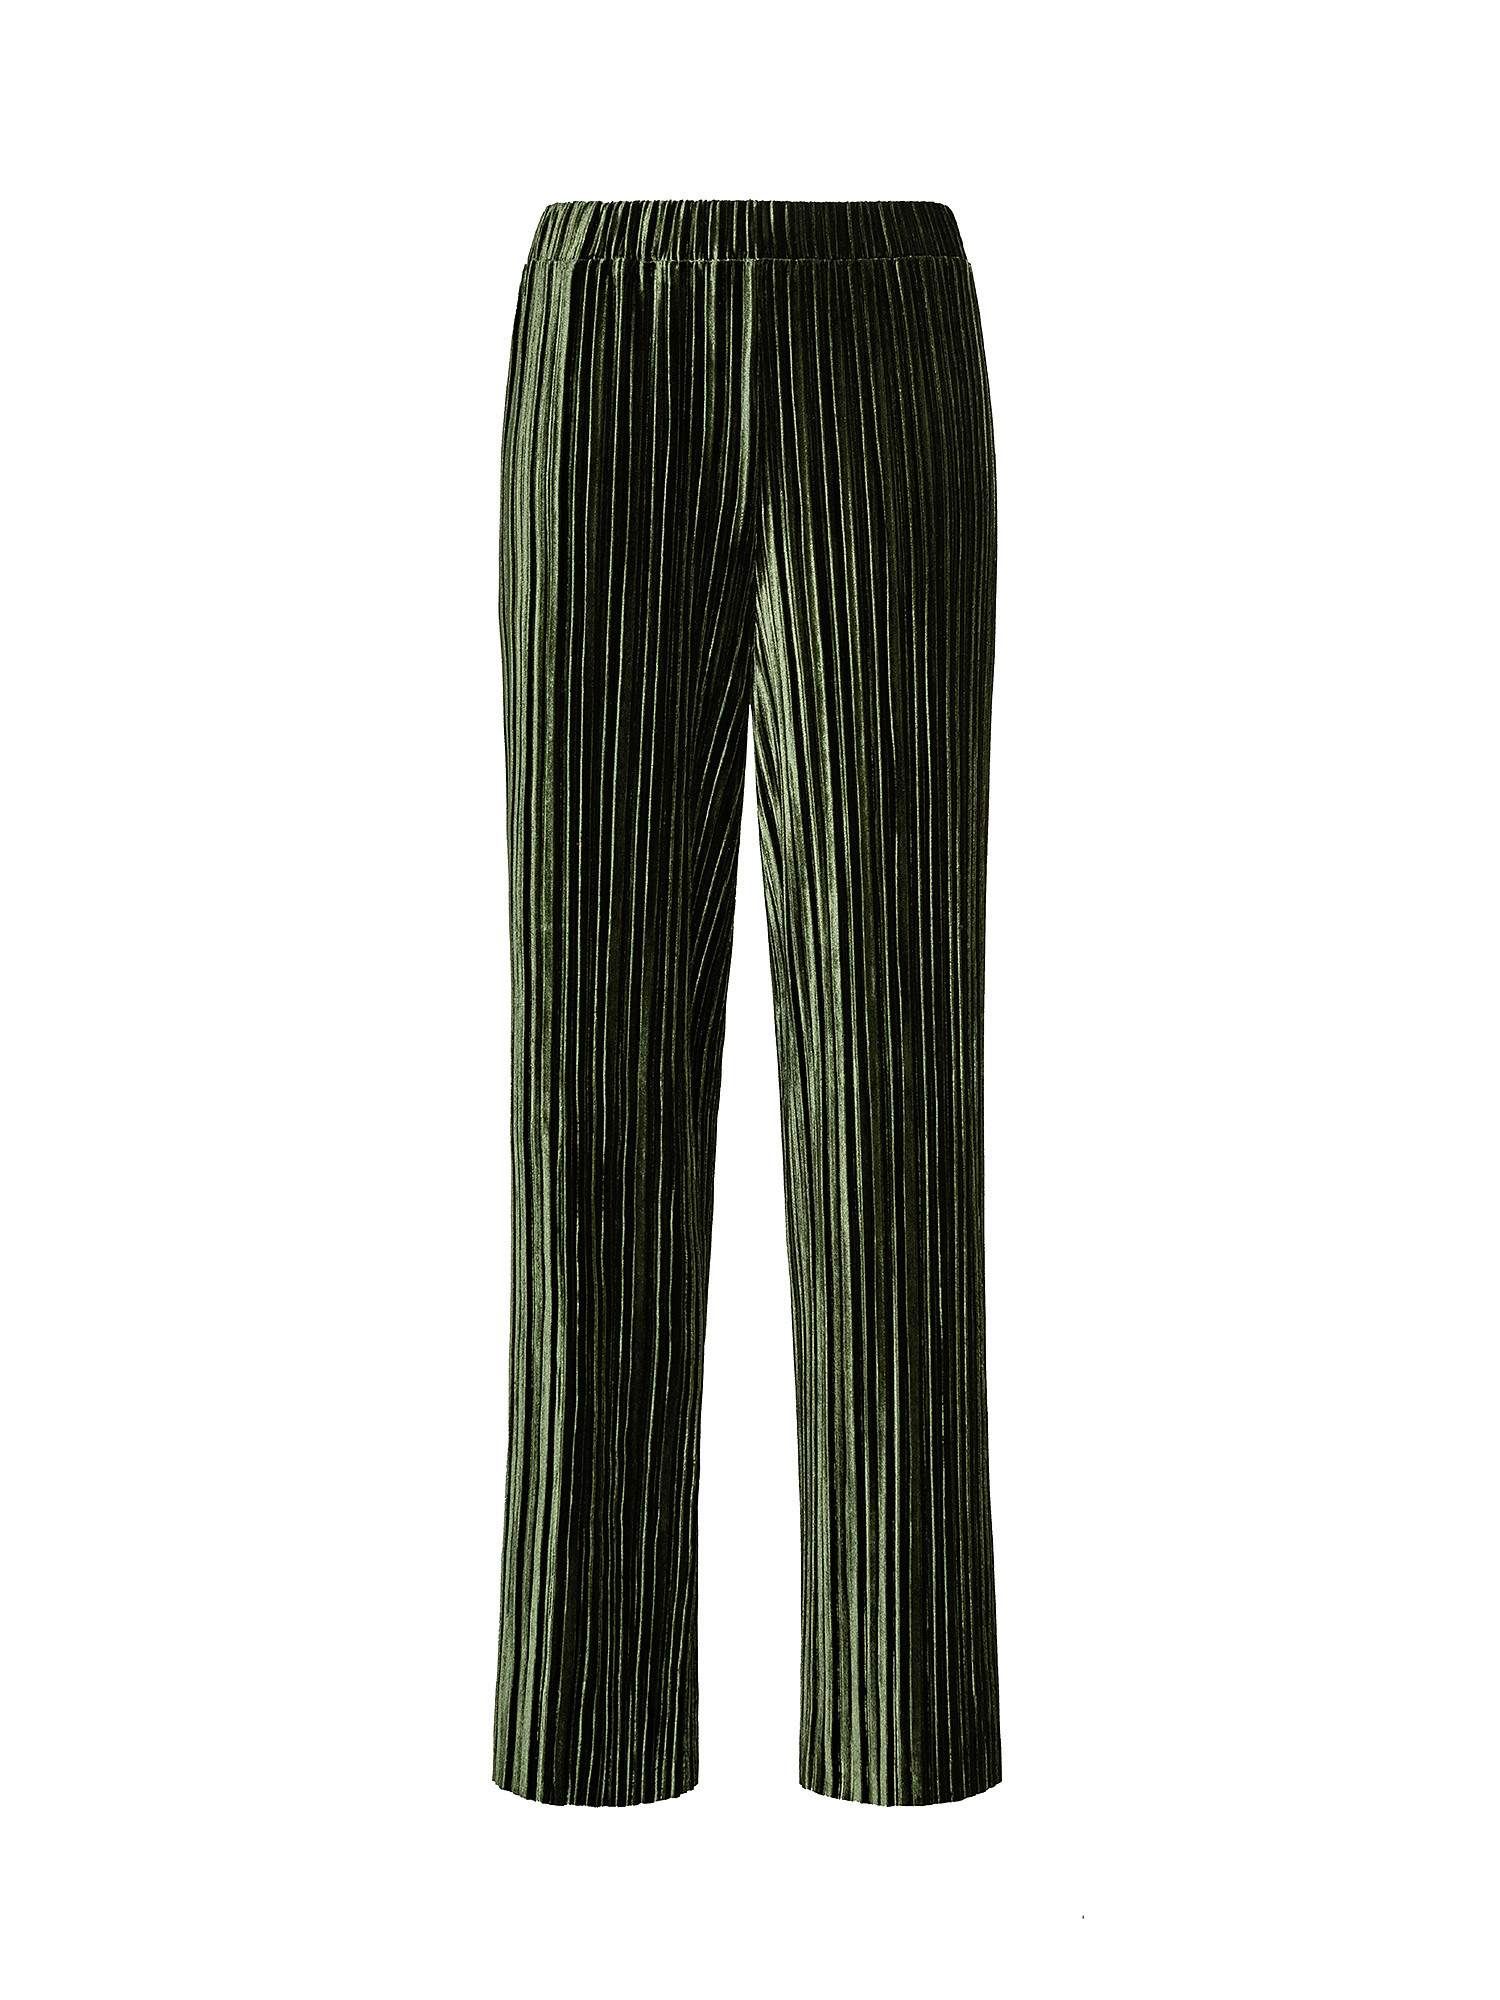 Pleated velor trousers, Green, large image number 0